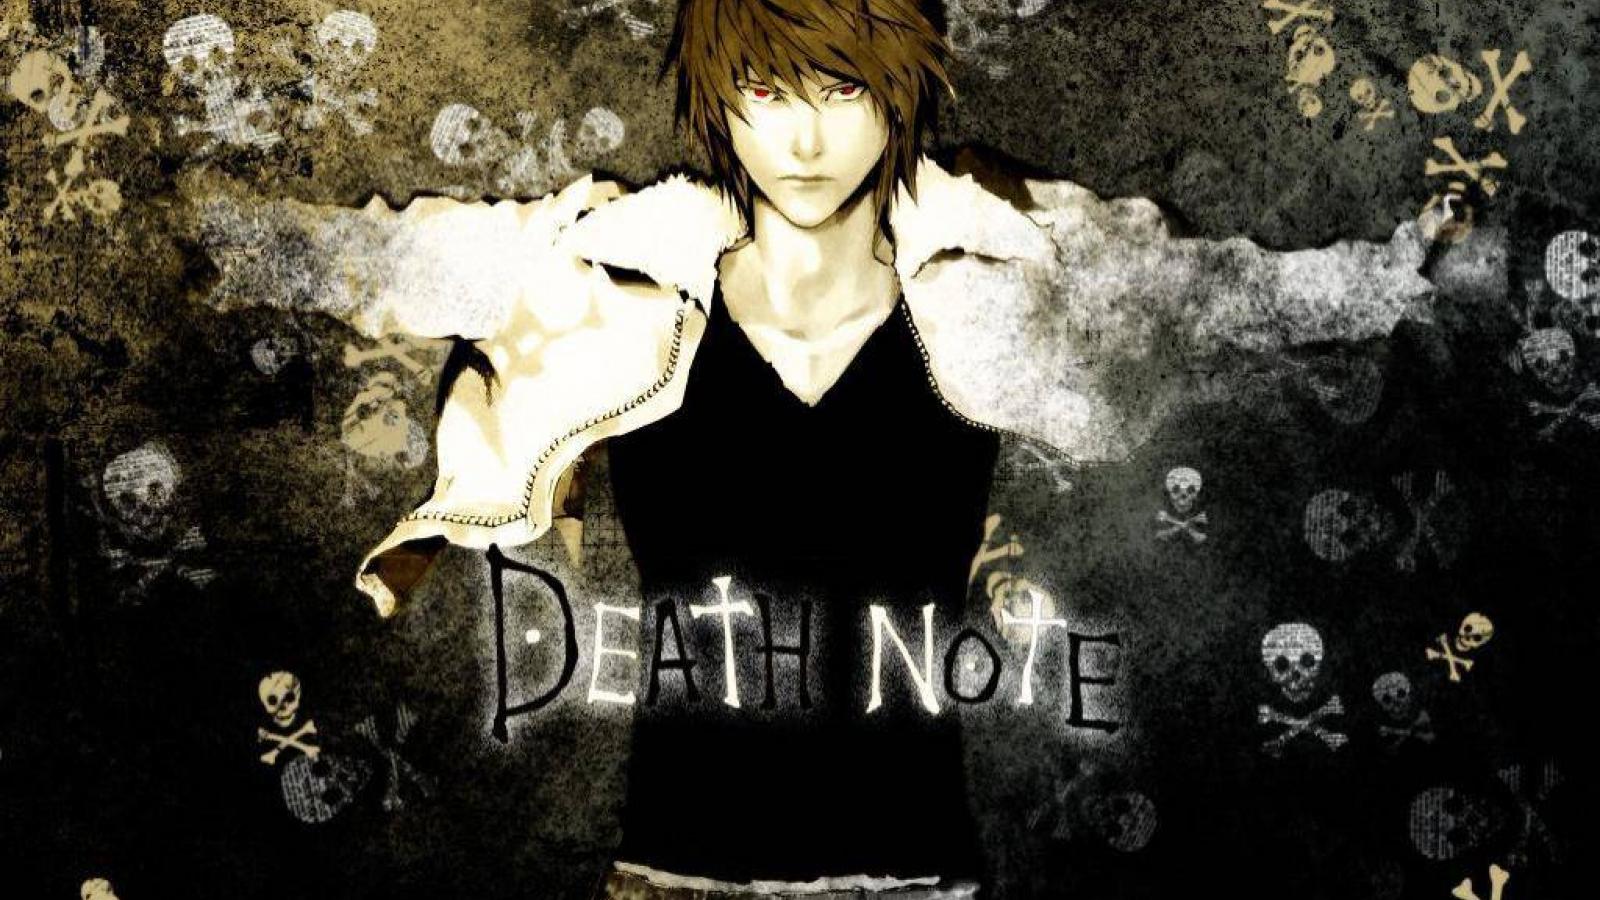 Death note yagami light l. wallpaper - (#6046) - High Quality and ...